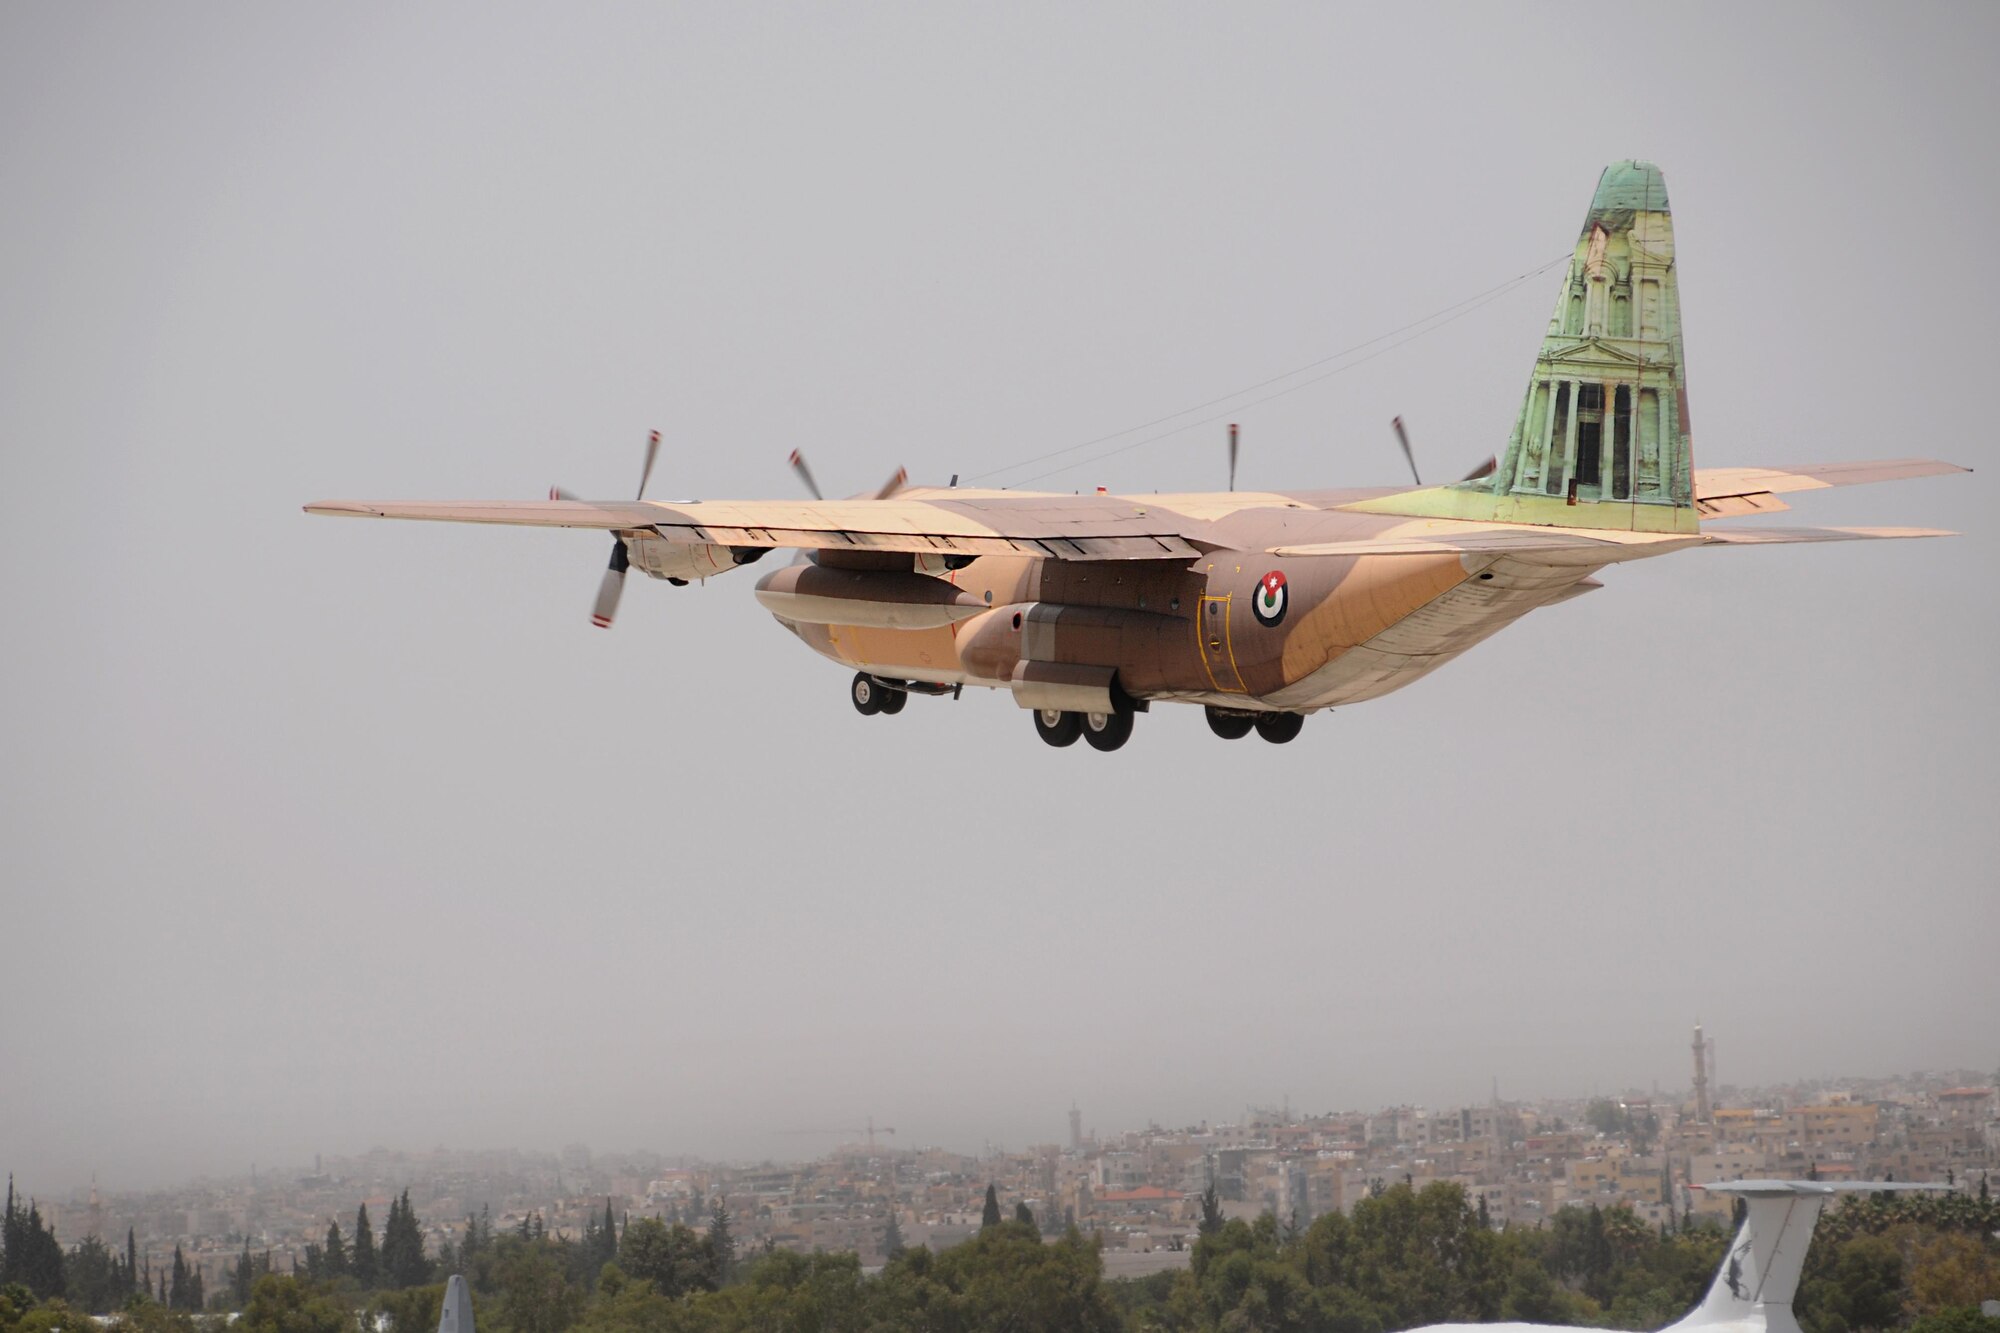 A Royal Jordanian Air Force C-130 takes off in Amman, Jordan, as part of familiarization flight with crews from the 94th Airlift Wing, Dobbins Air Reserve Base, Ga., May 15, 2016. The flight was the initial C-130 flight in Exercise Eager Lion, a bilaterial exercise including U.S. and Jordanian military forces, held May 15-24. (U.S. Air Force photo/Staff Sgt. Alan Abernethy)